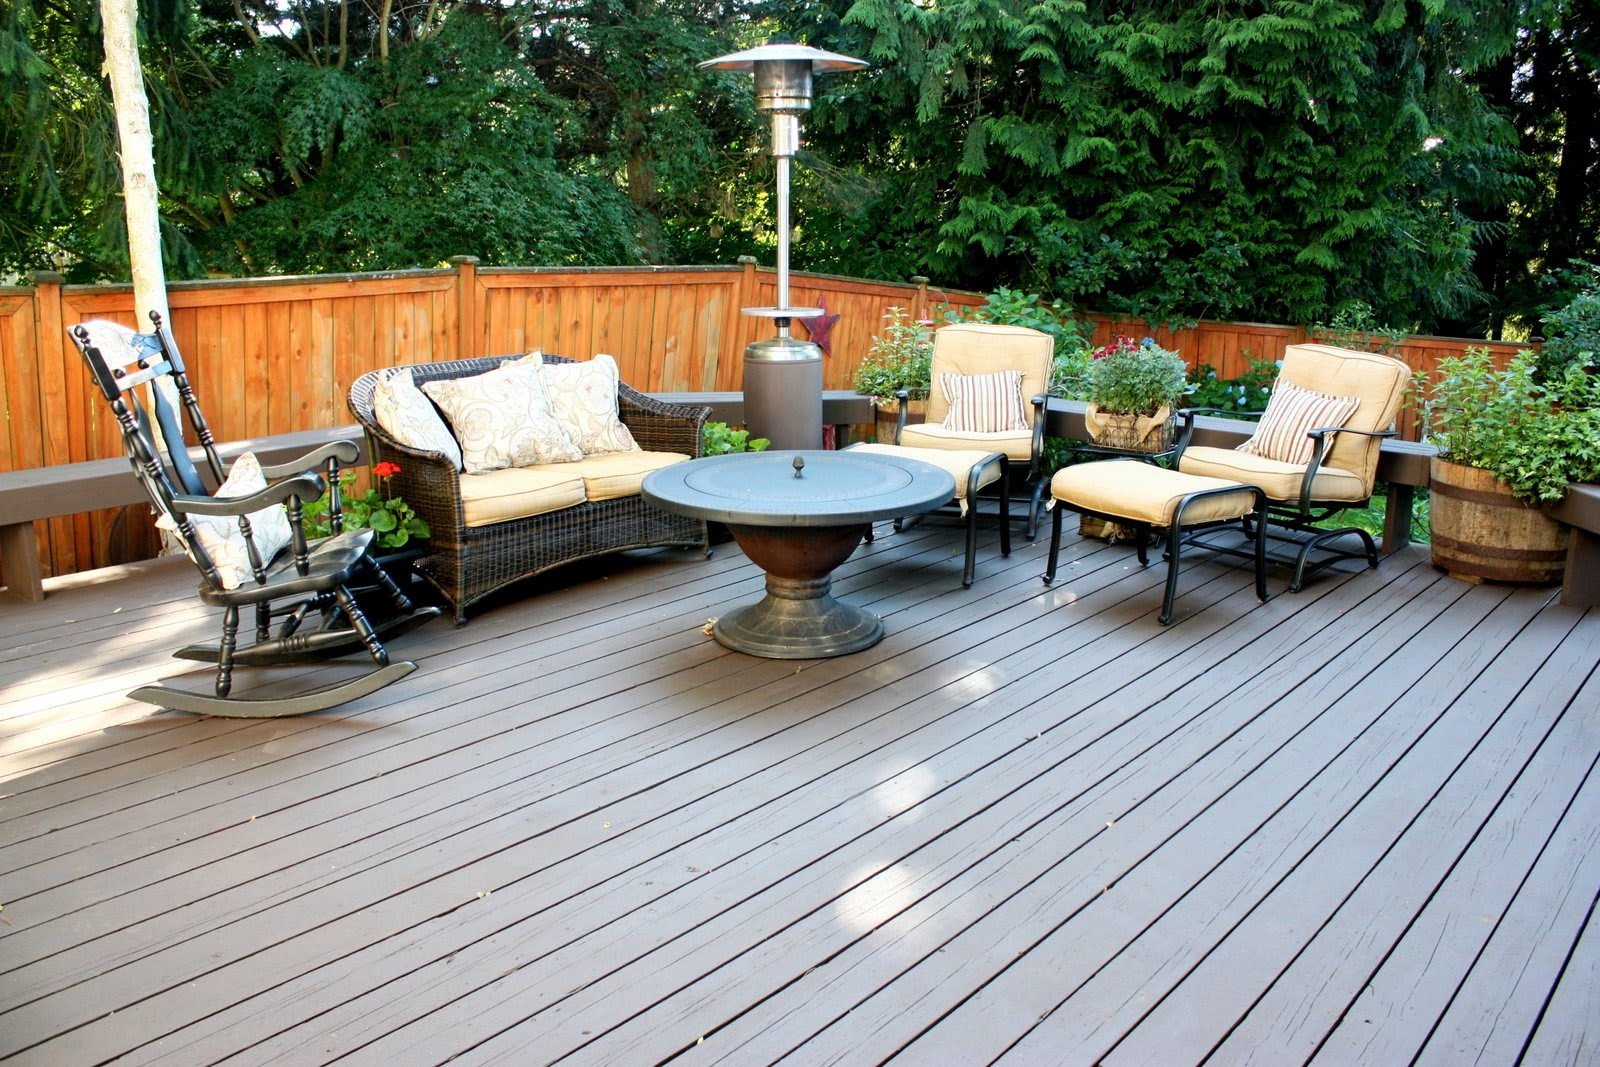 Decking Nice Outdoor Home Design With Behr Deck Paint intended for dimensions 1600 X 1067